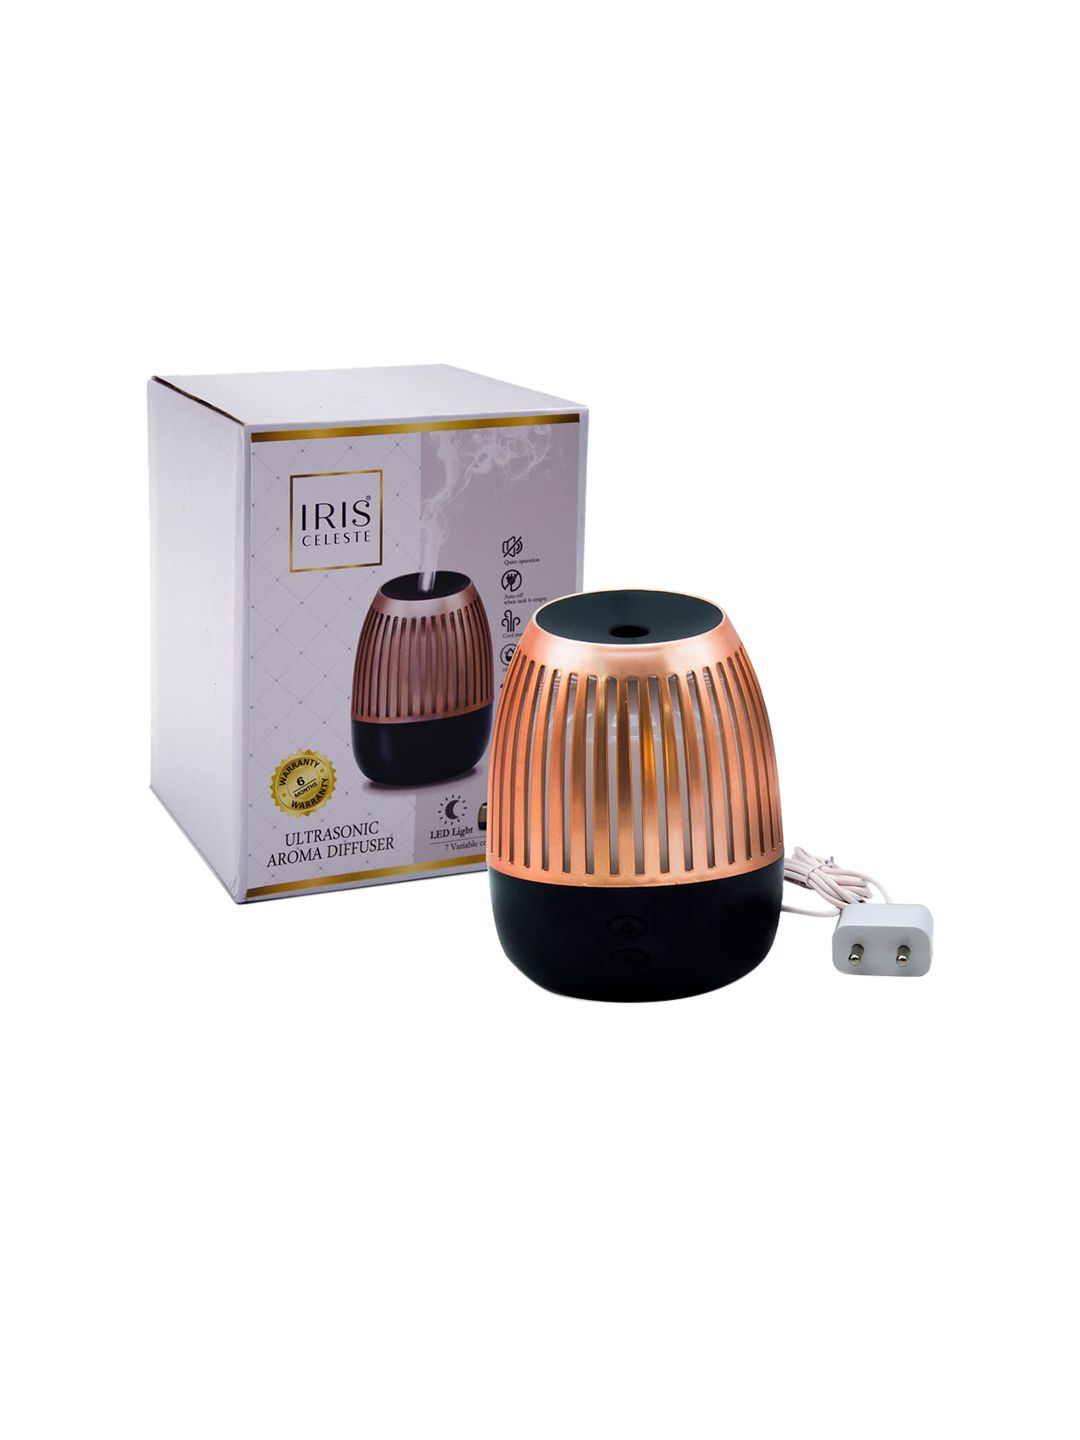 Iris Celeste Ultrasonic Aroma Diffuser with Cool Mist and 7 Colors LED Light Price in India